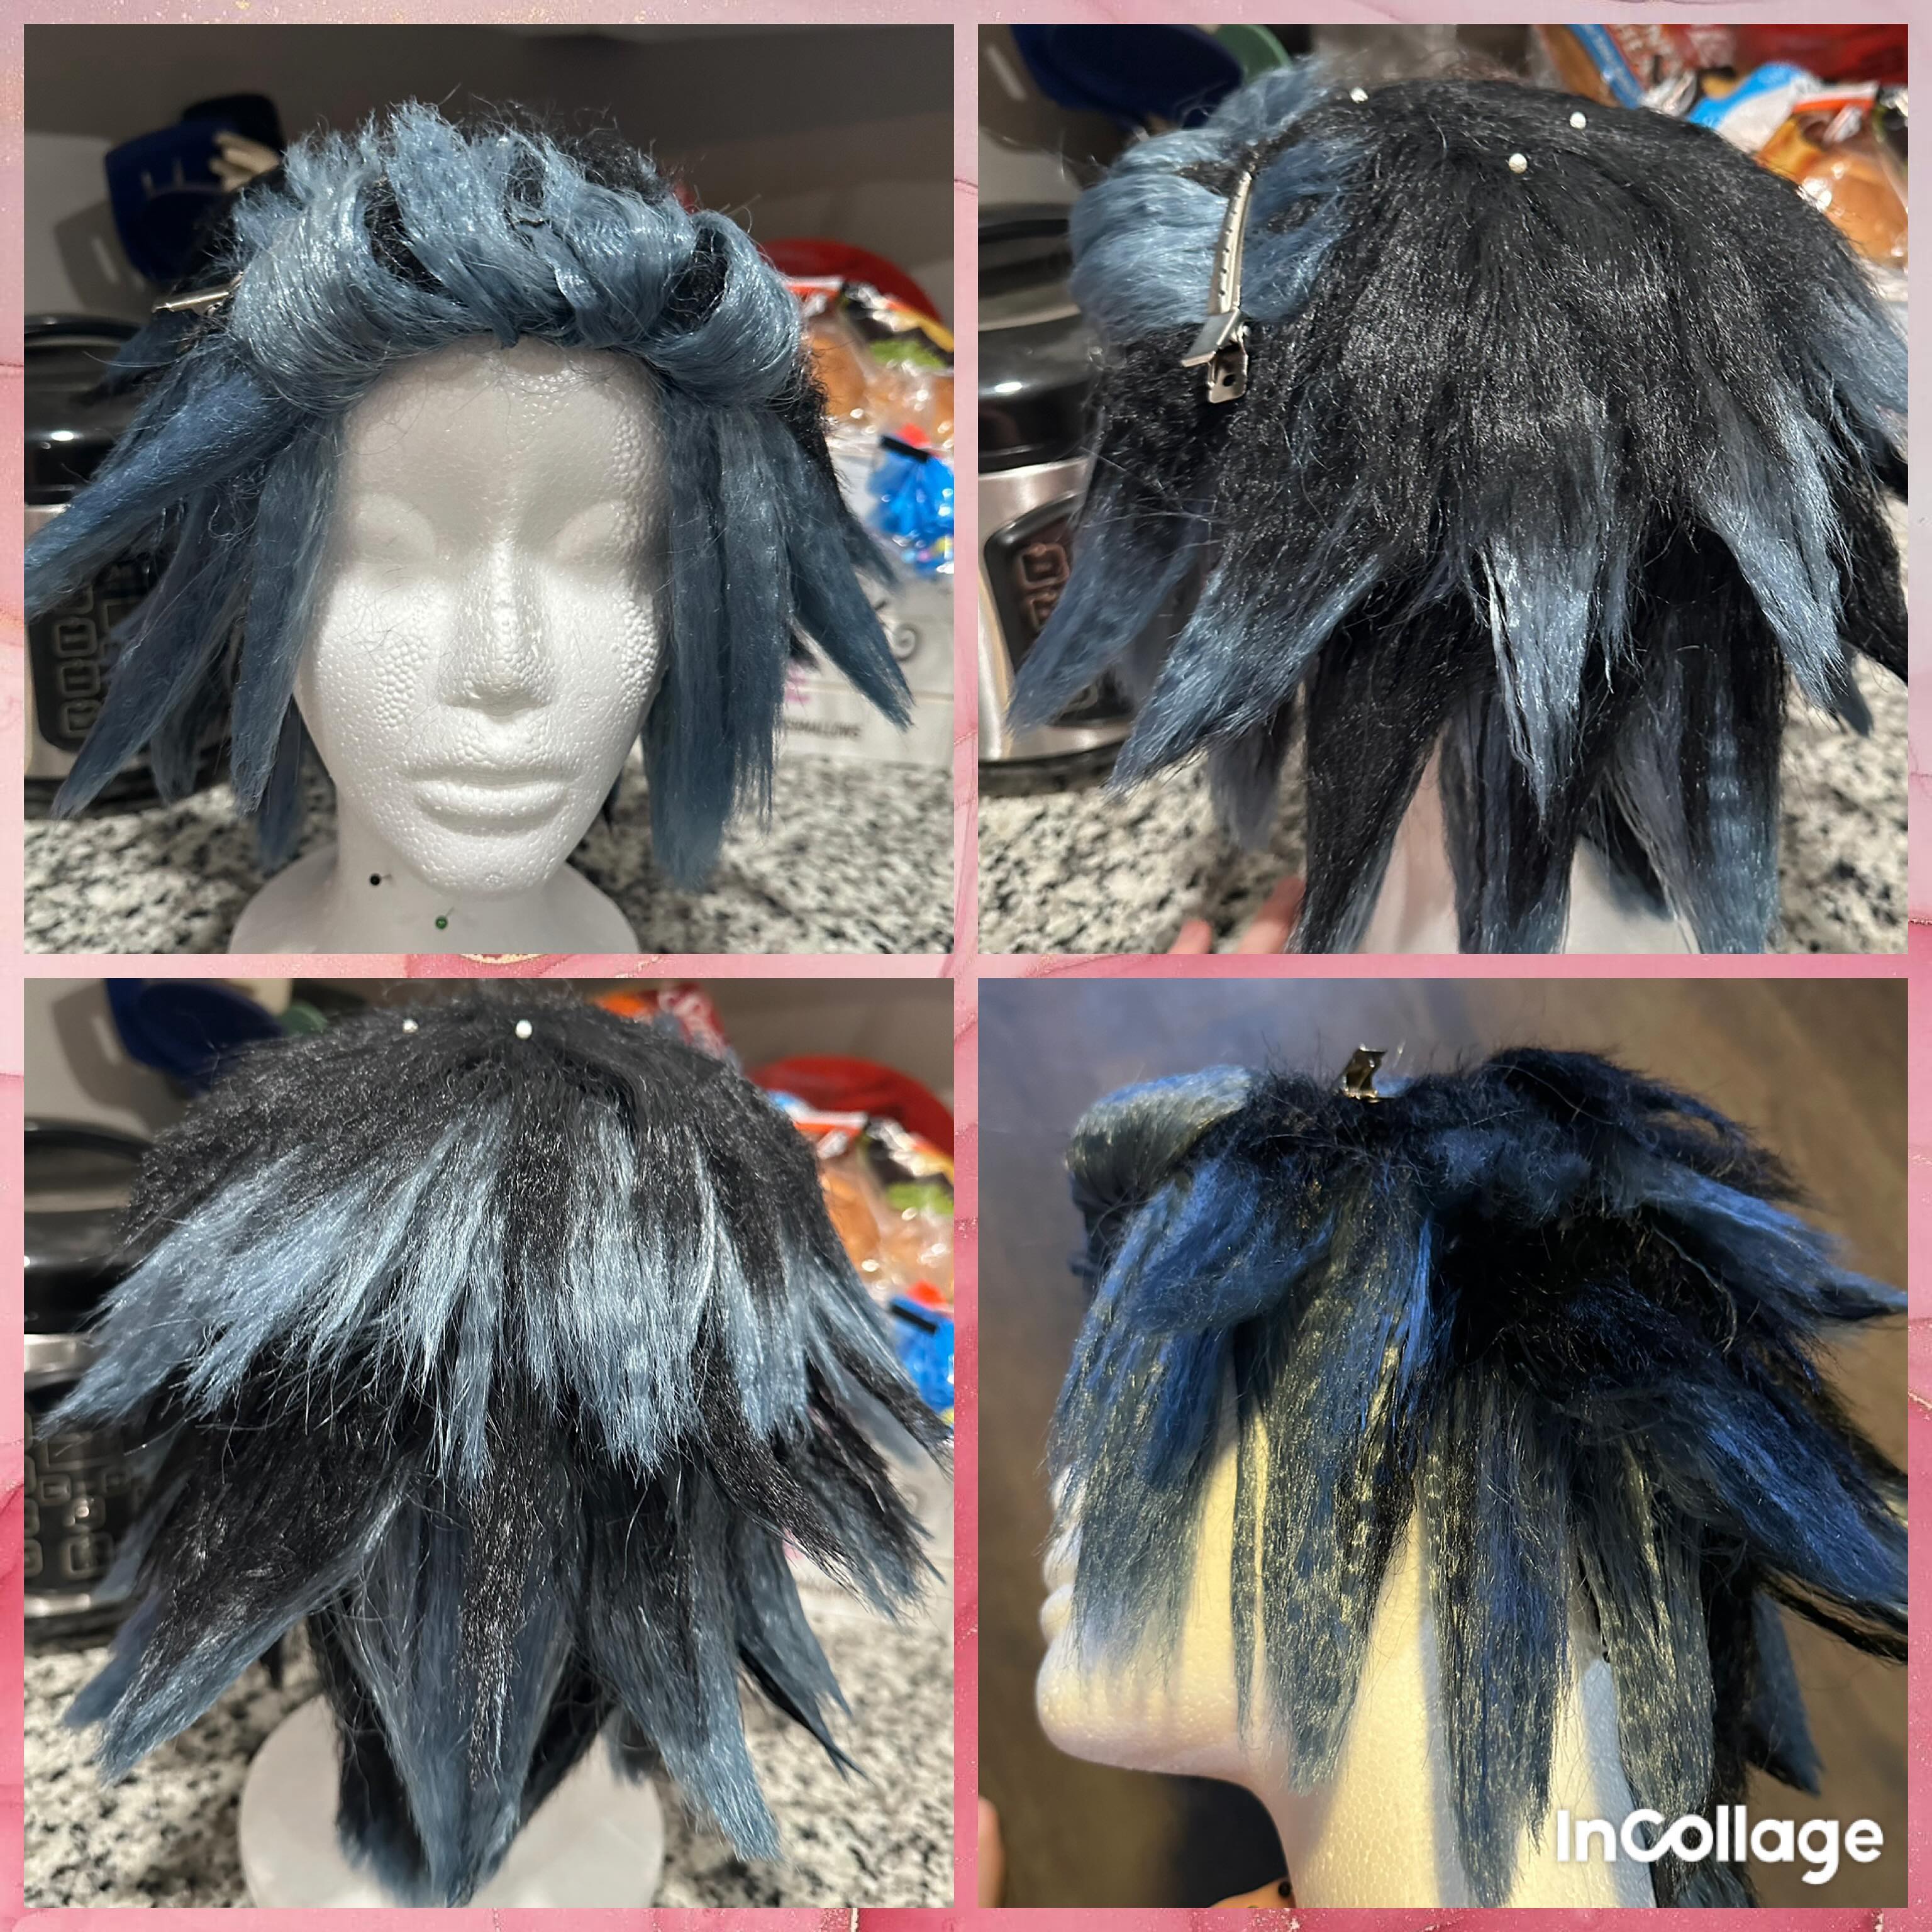 I messed around with the wig some more this morning and restyled the back of the wig. 

#cosplay #cosplaywip #wigstyling #wigwip